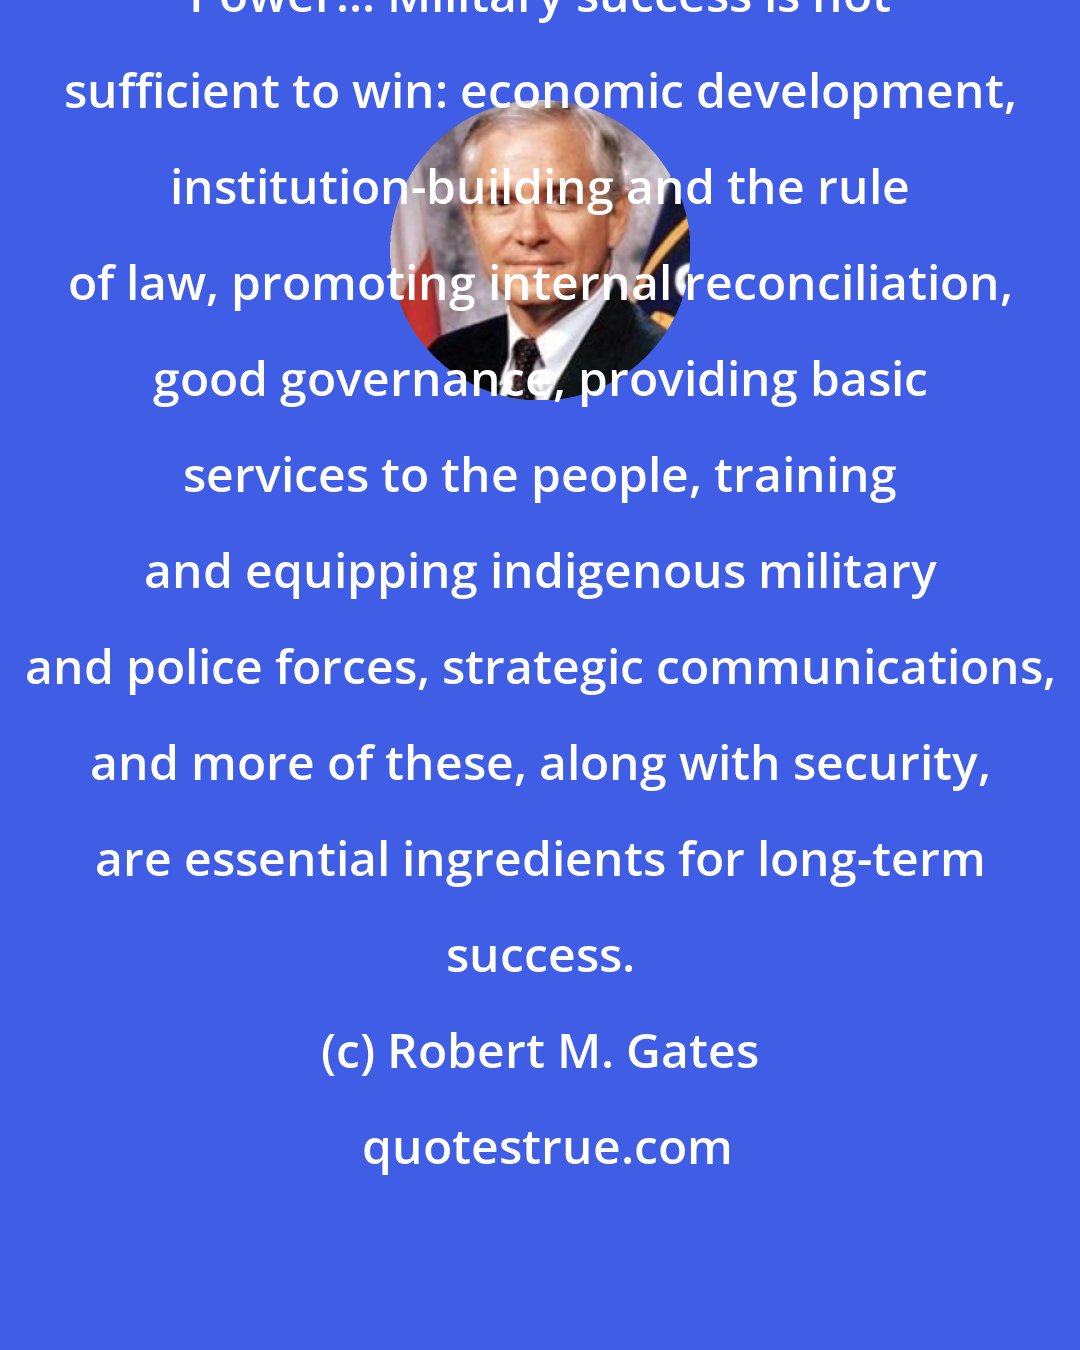 Robert M. Gates: Power... Military success is not sufficient to win: economic development, institution-building and the rule of law, promoting internal reconciliation, good governance, providing basic services to the people, training and equipping indigenous military and police forces, strategic communications, and more of these, along with security, are essential ingredients for long-term success.